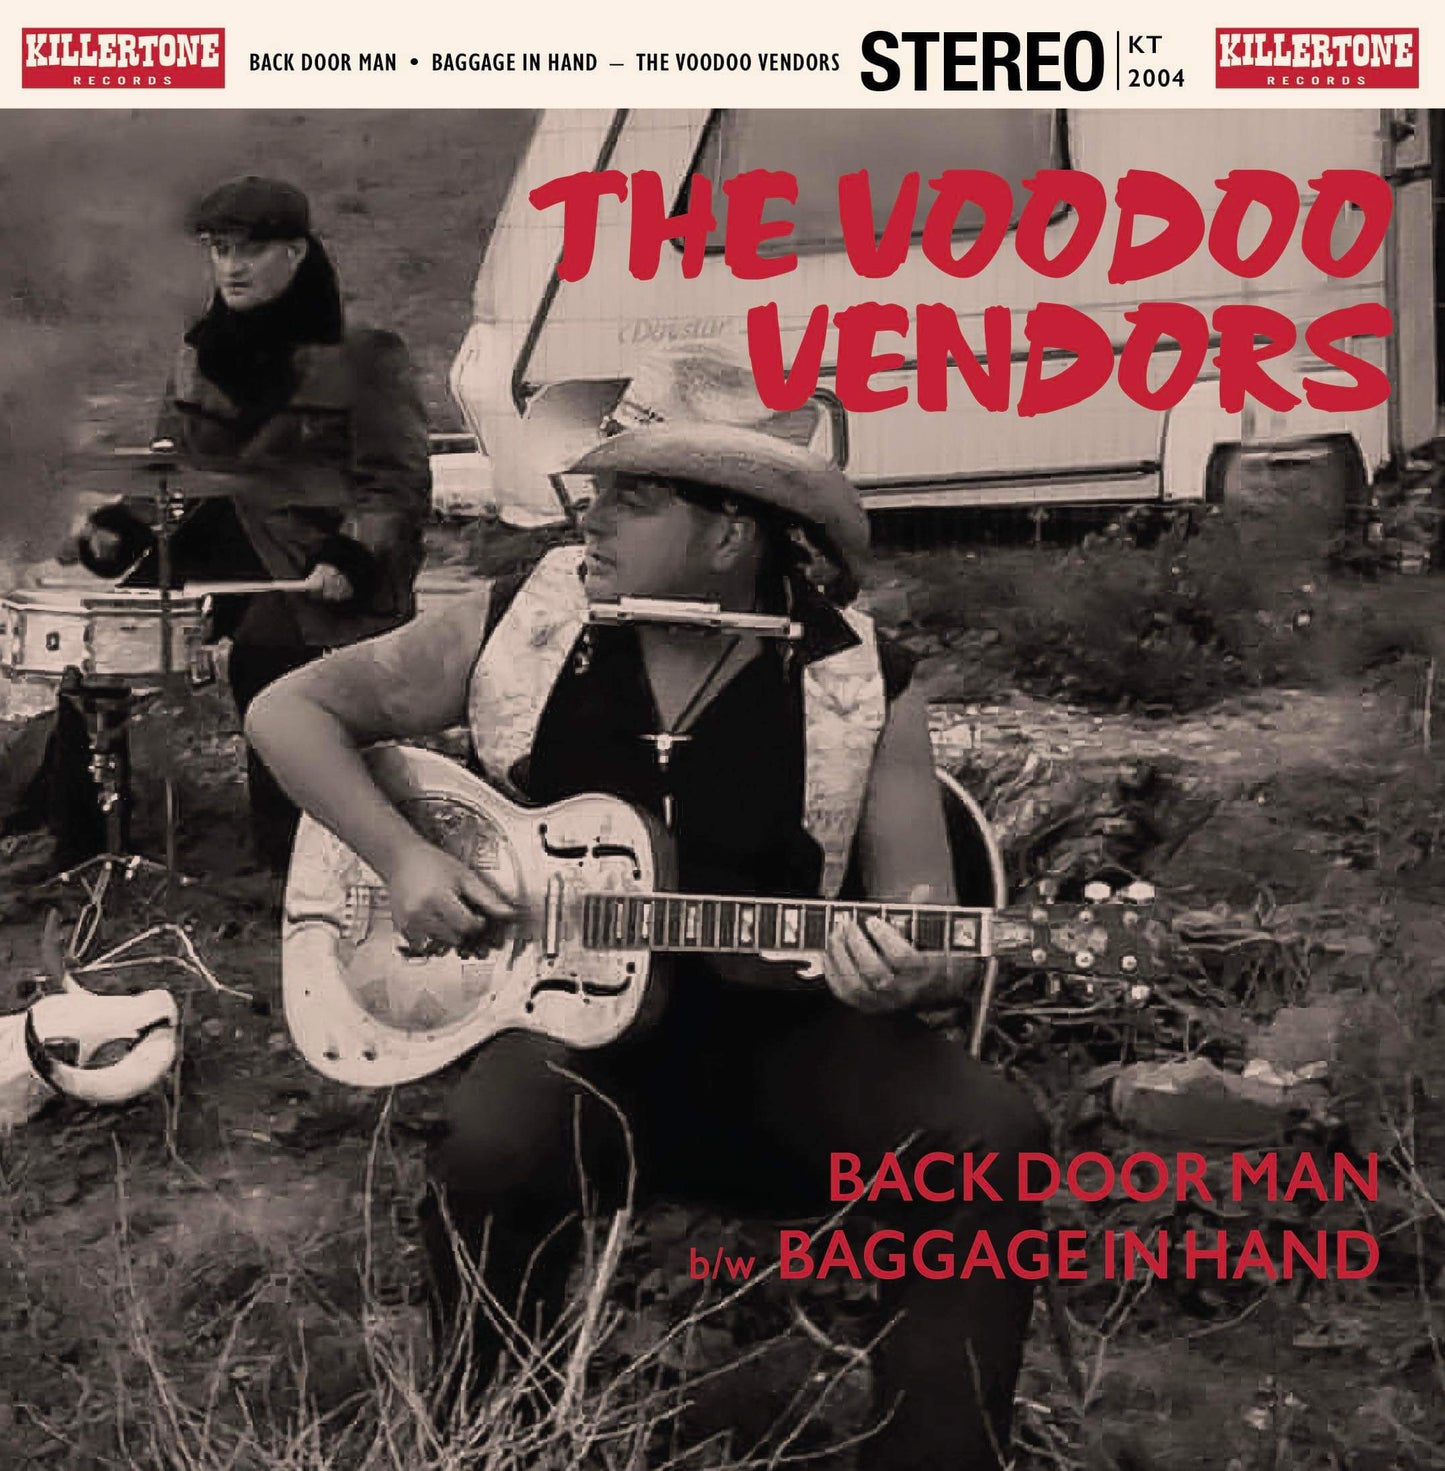 Voodoo Vendors  7" Back Door Man/Baggage in Hand - RED VINYL NUMBERED LIMITED EDITION